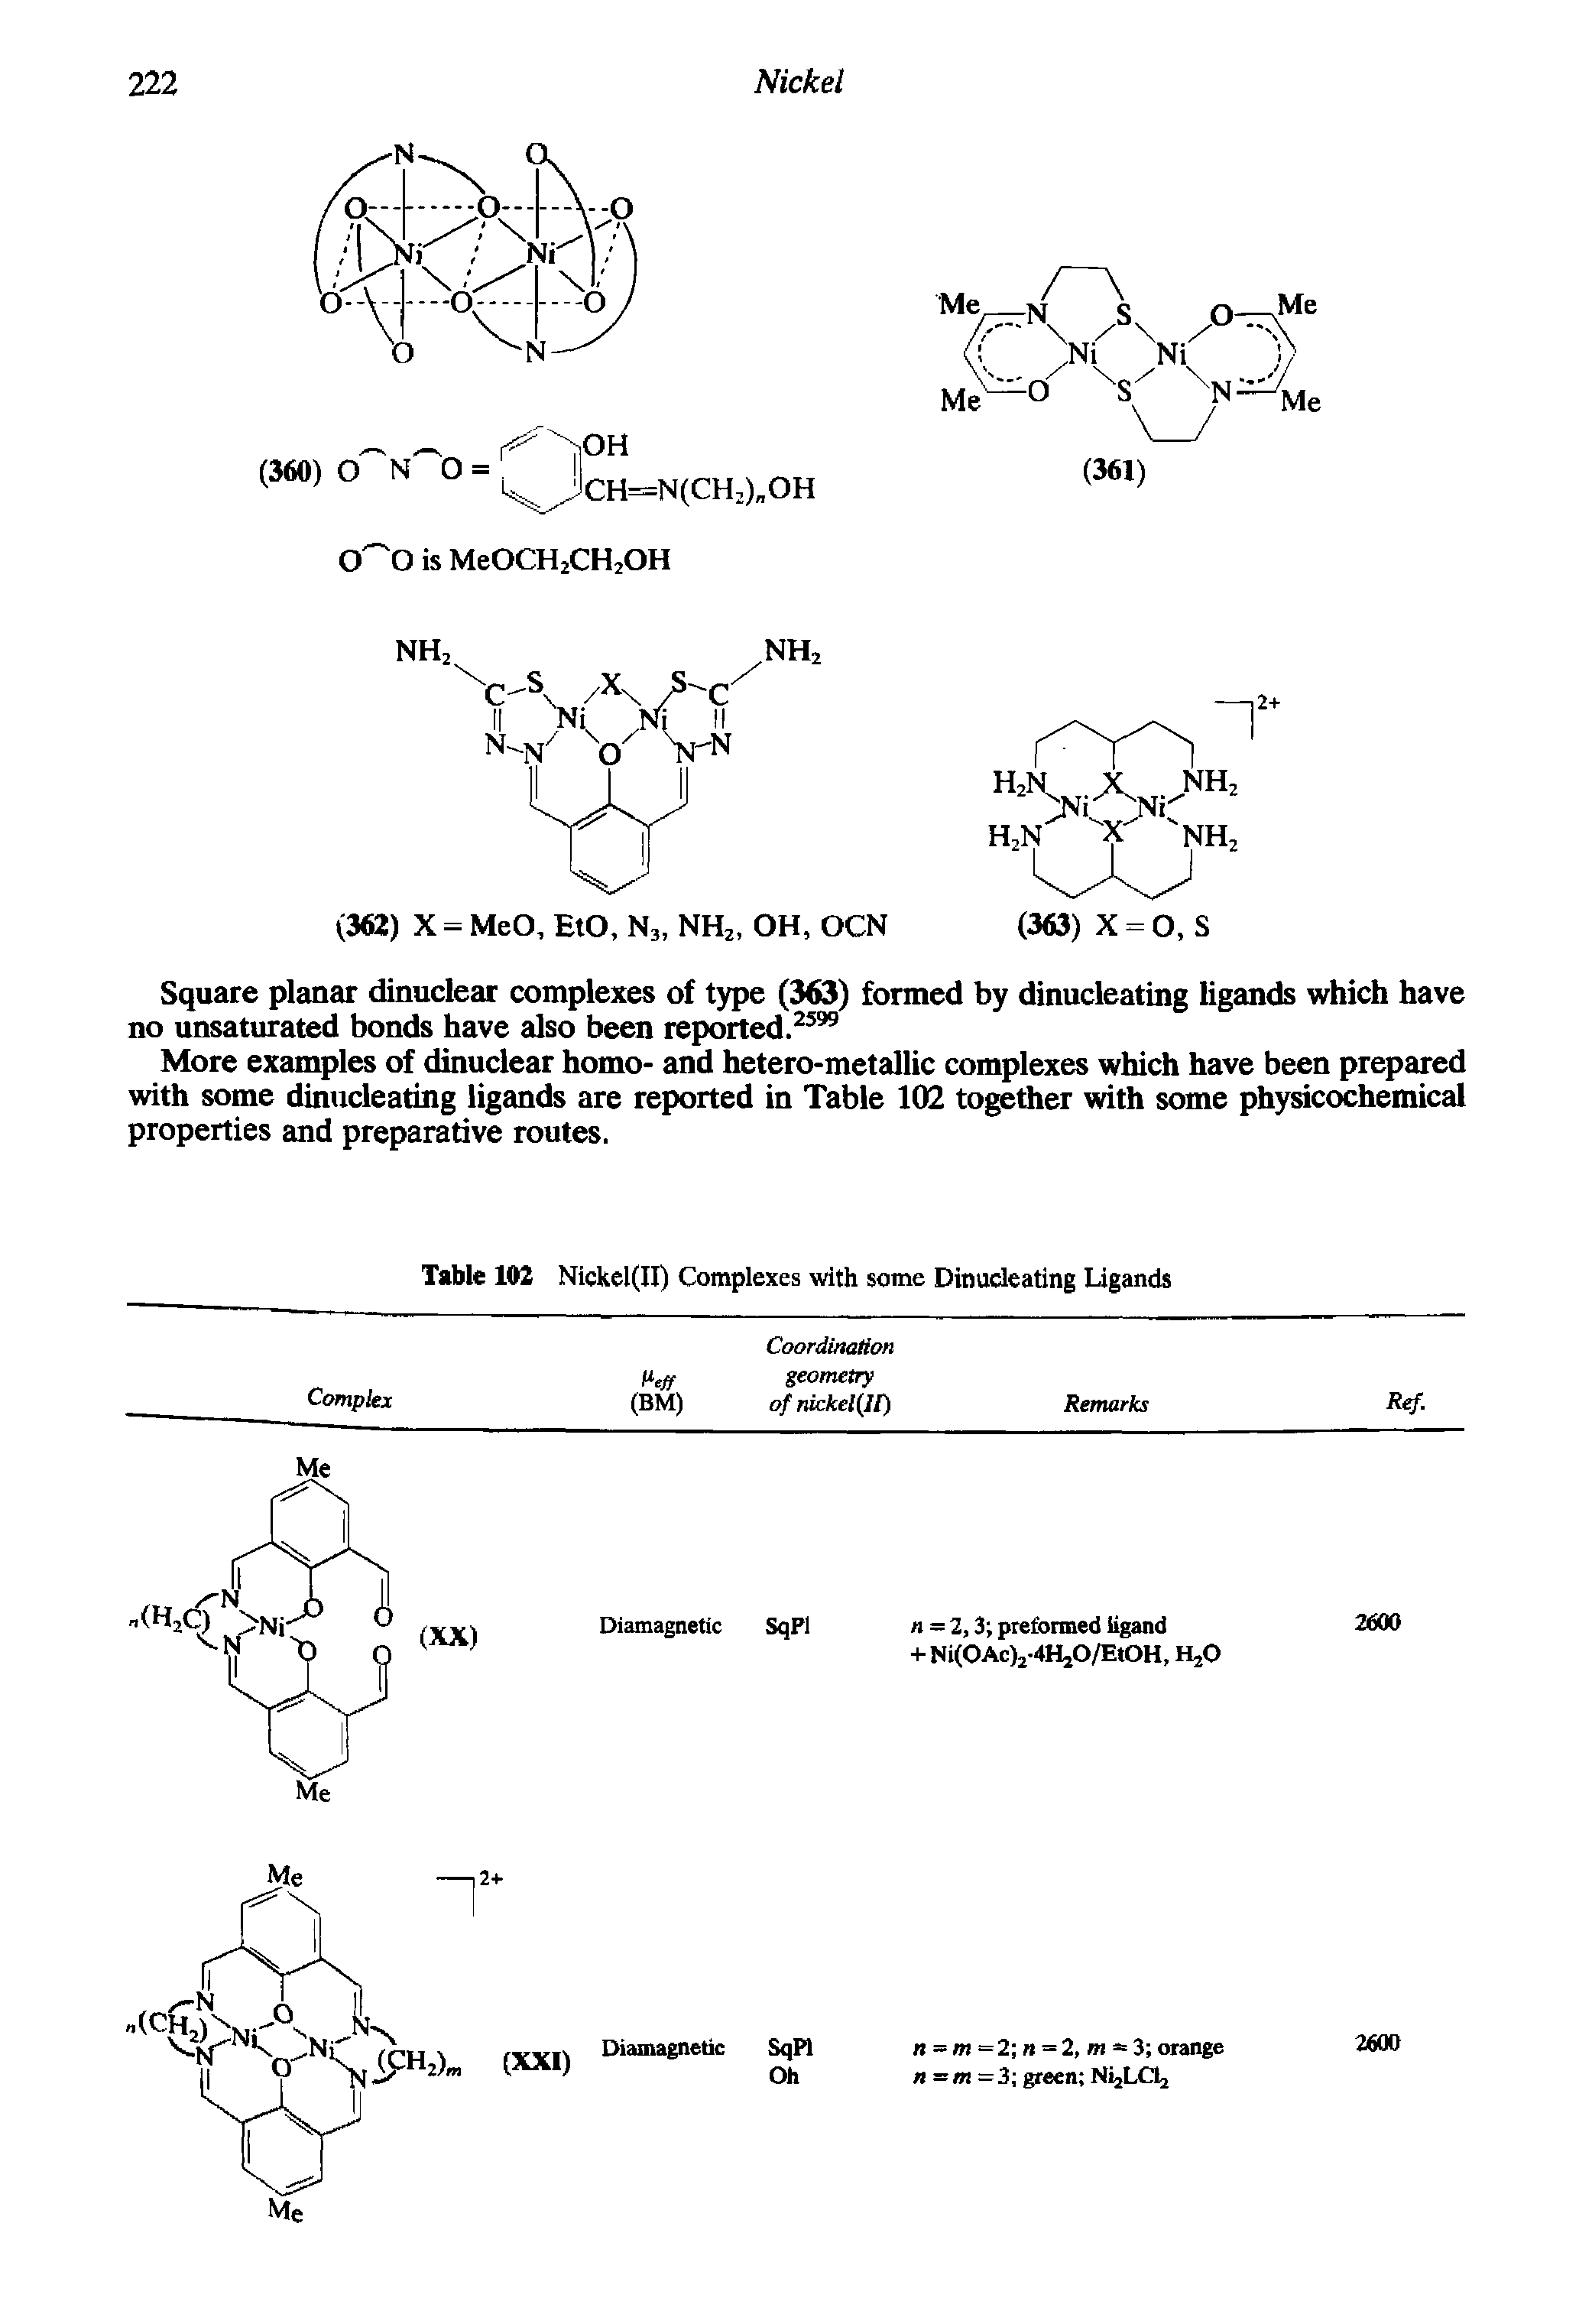 Table 102 Nickel(II) Complexes with some Dinucleating Ligands...